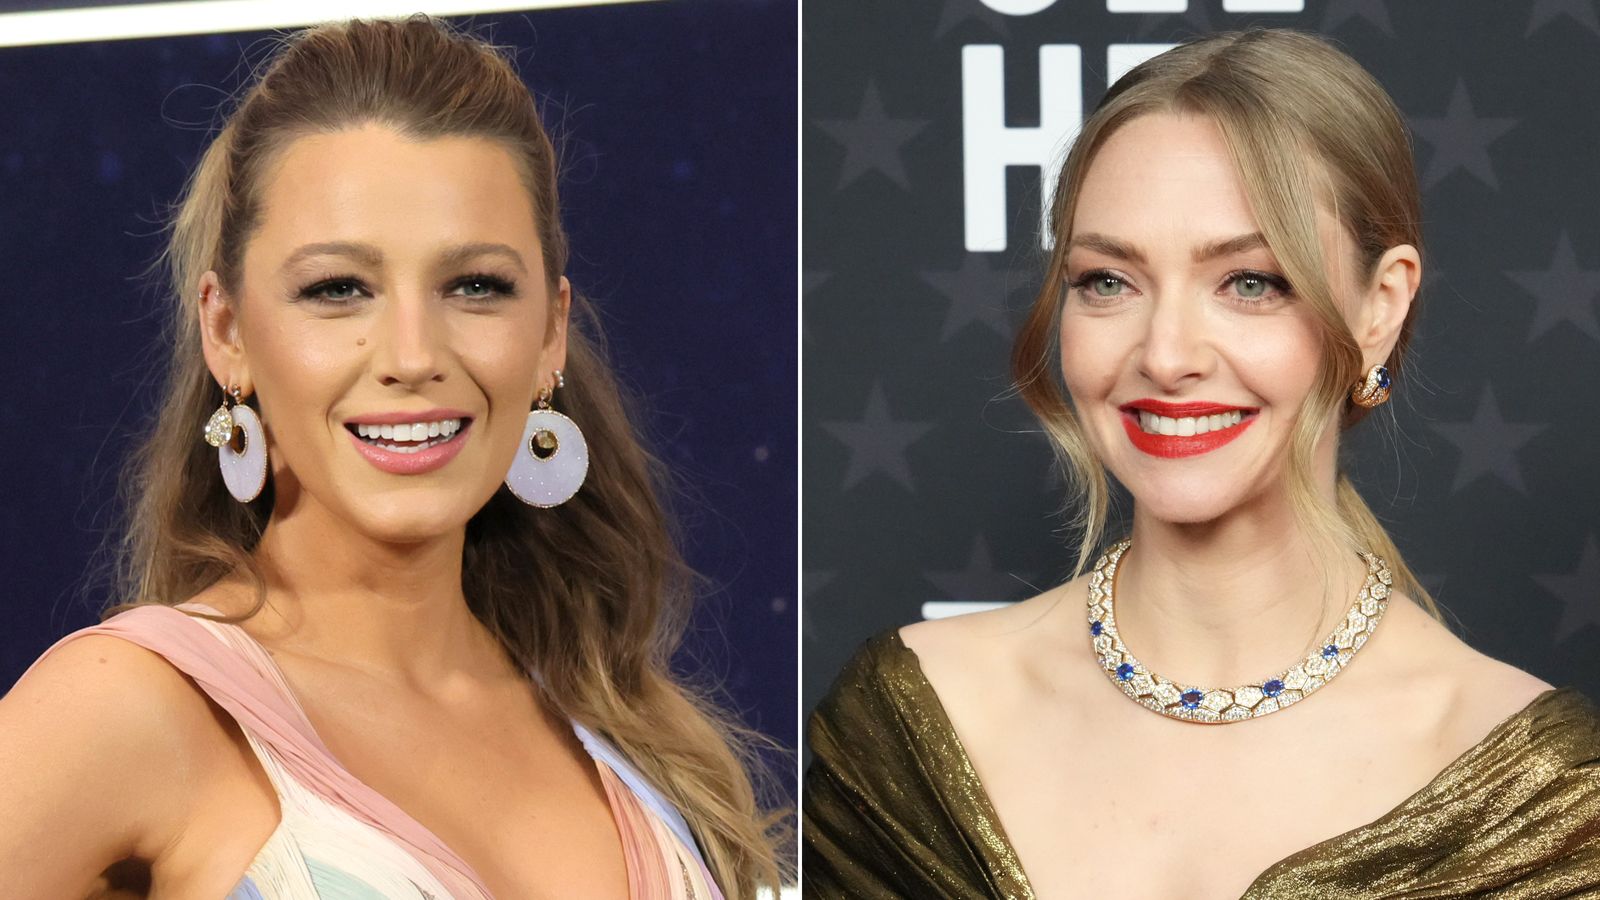 Amanda Seyfried reveals that Blake Lively was almost cast as Karen